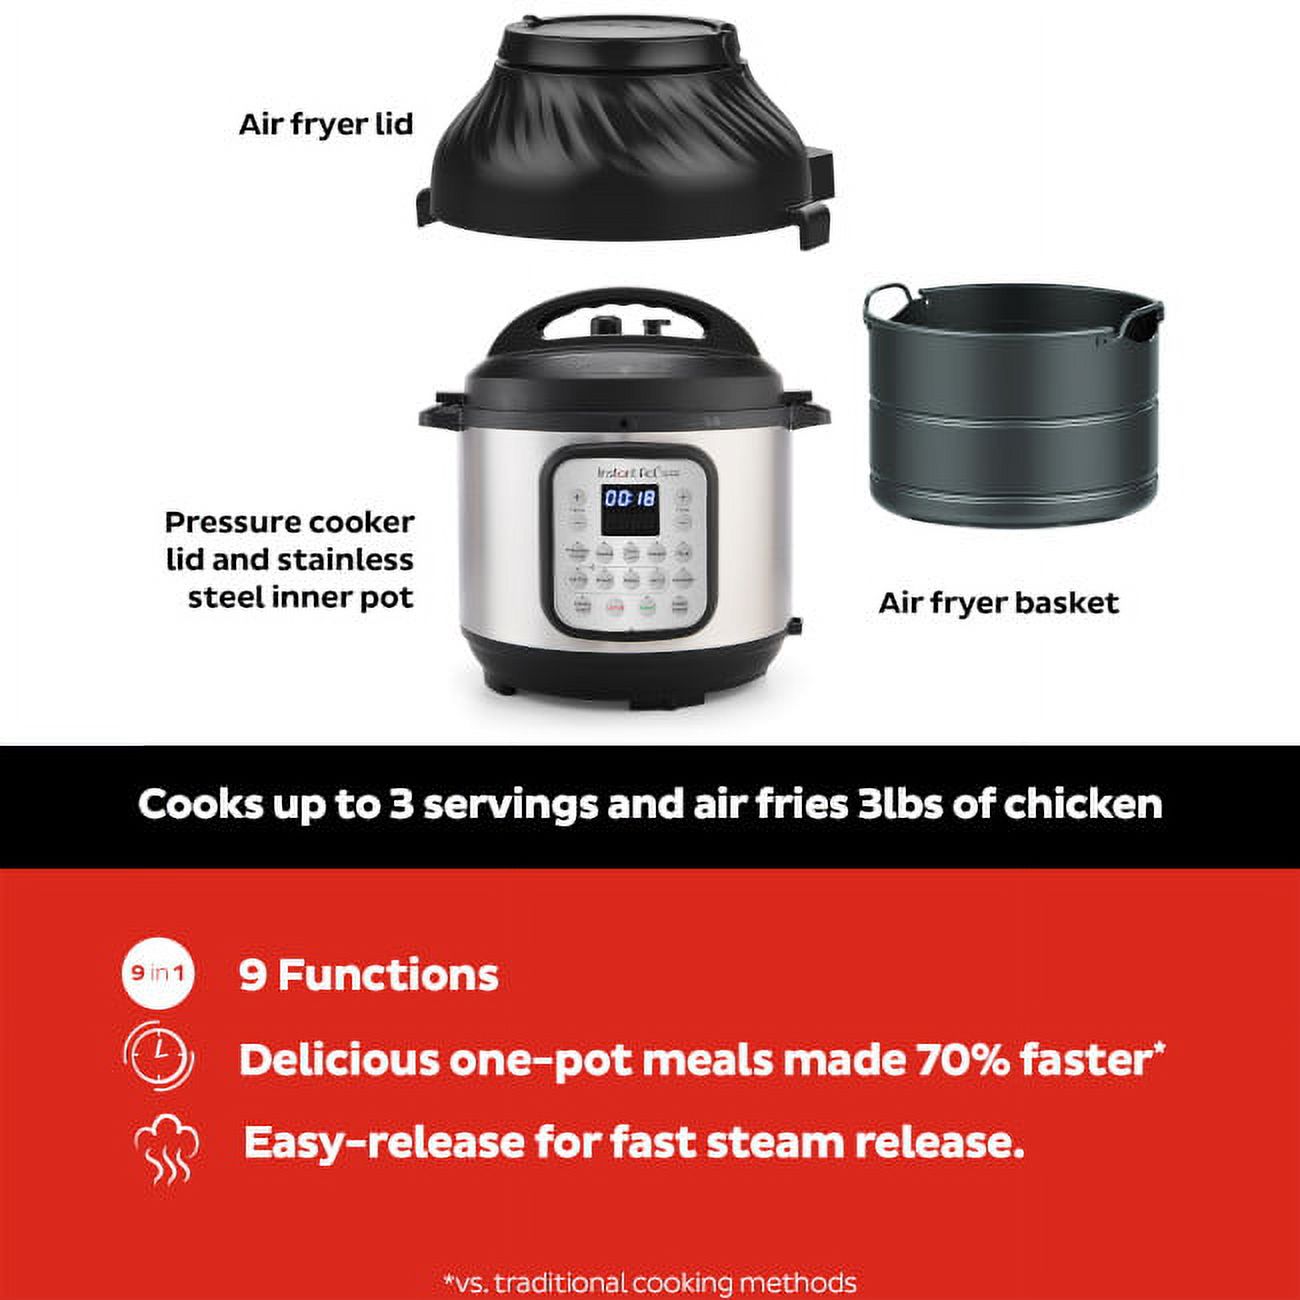 Instant Pot 6 Qt Duo Crisp 9-in-1 Air Fryer and Pressure Cooker Combo - image 3 of 9